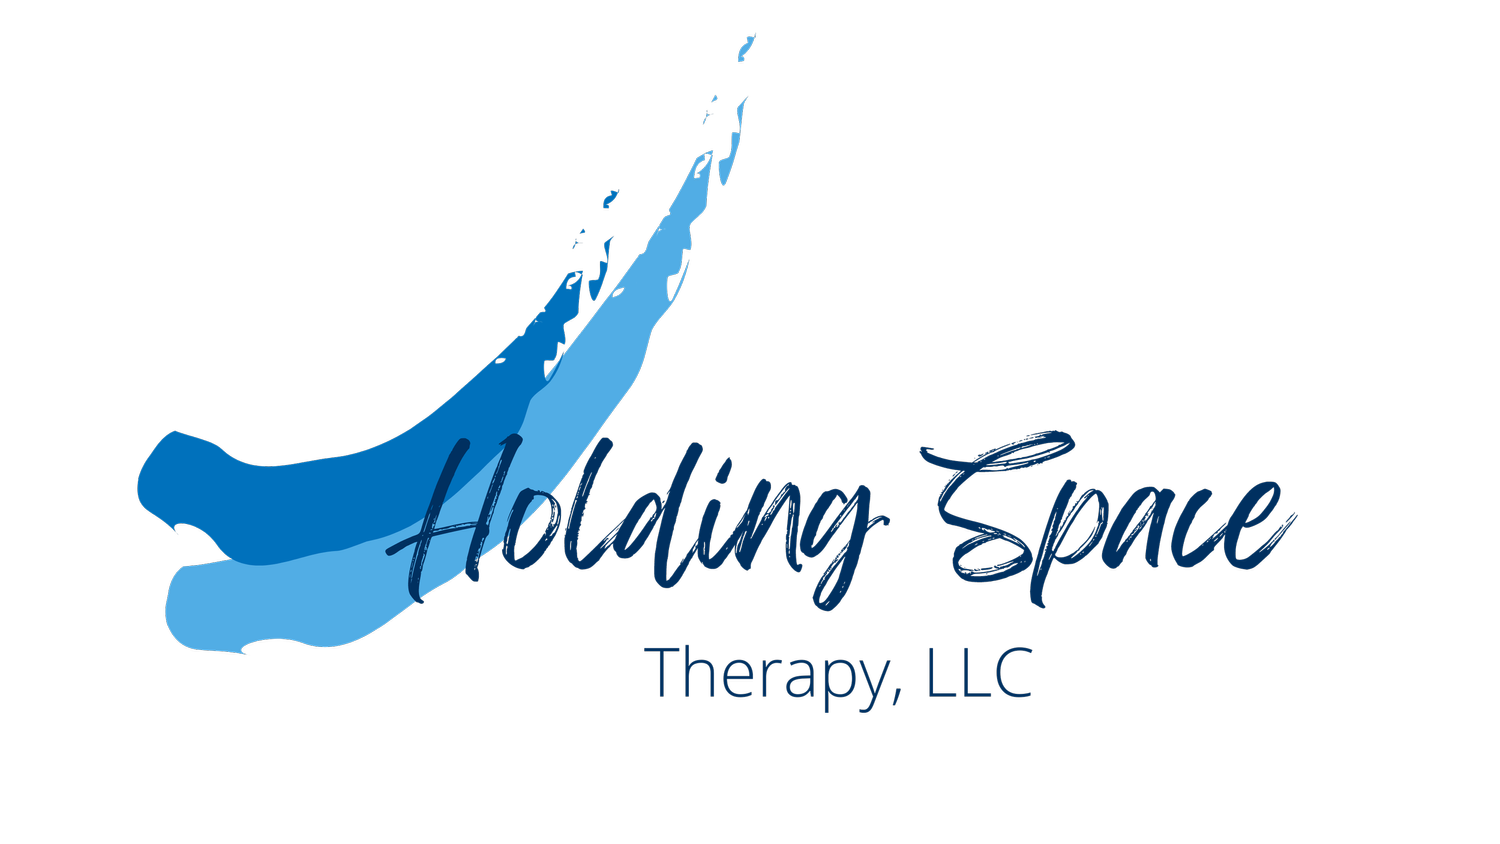 Holding Space Therapy, LLC